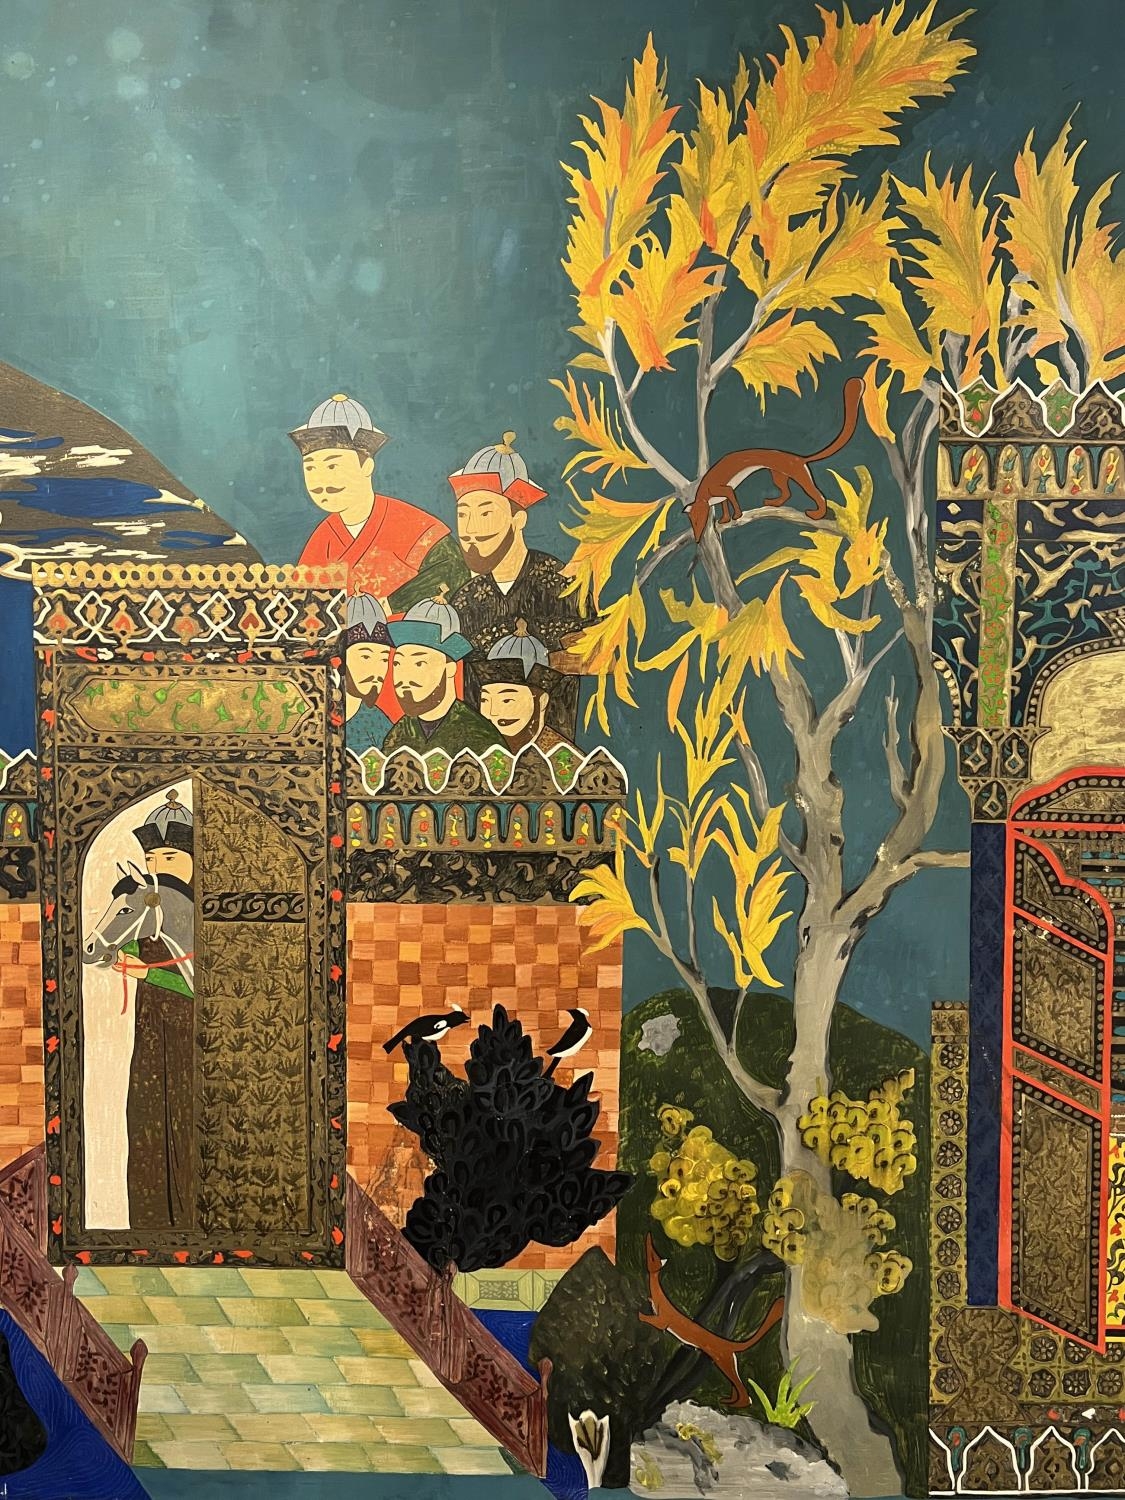 AFTER THE SHAHNAMEH OF SHAH ABBAS I, 20th century, 'The Coronation of Kay Louhrasp by Kay Khosrow - Image 2 of 4